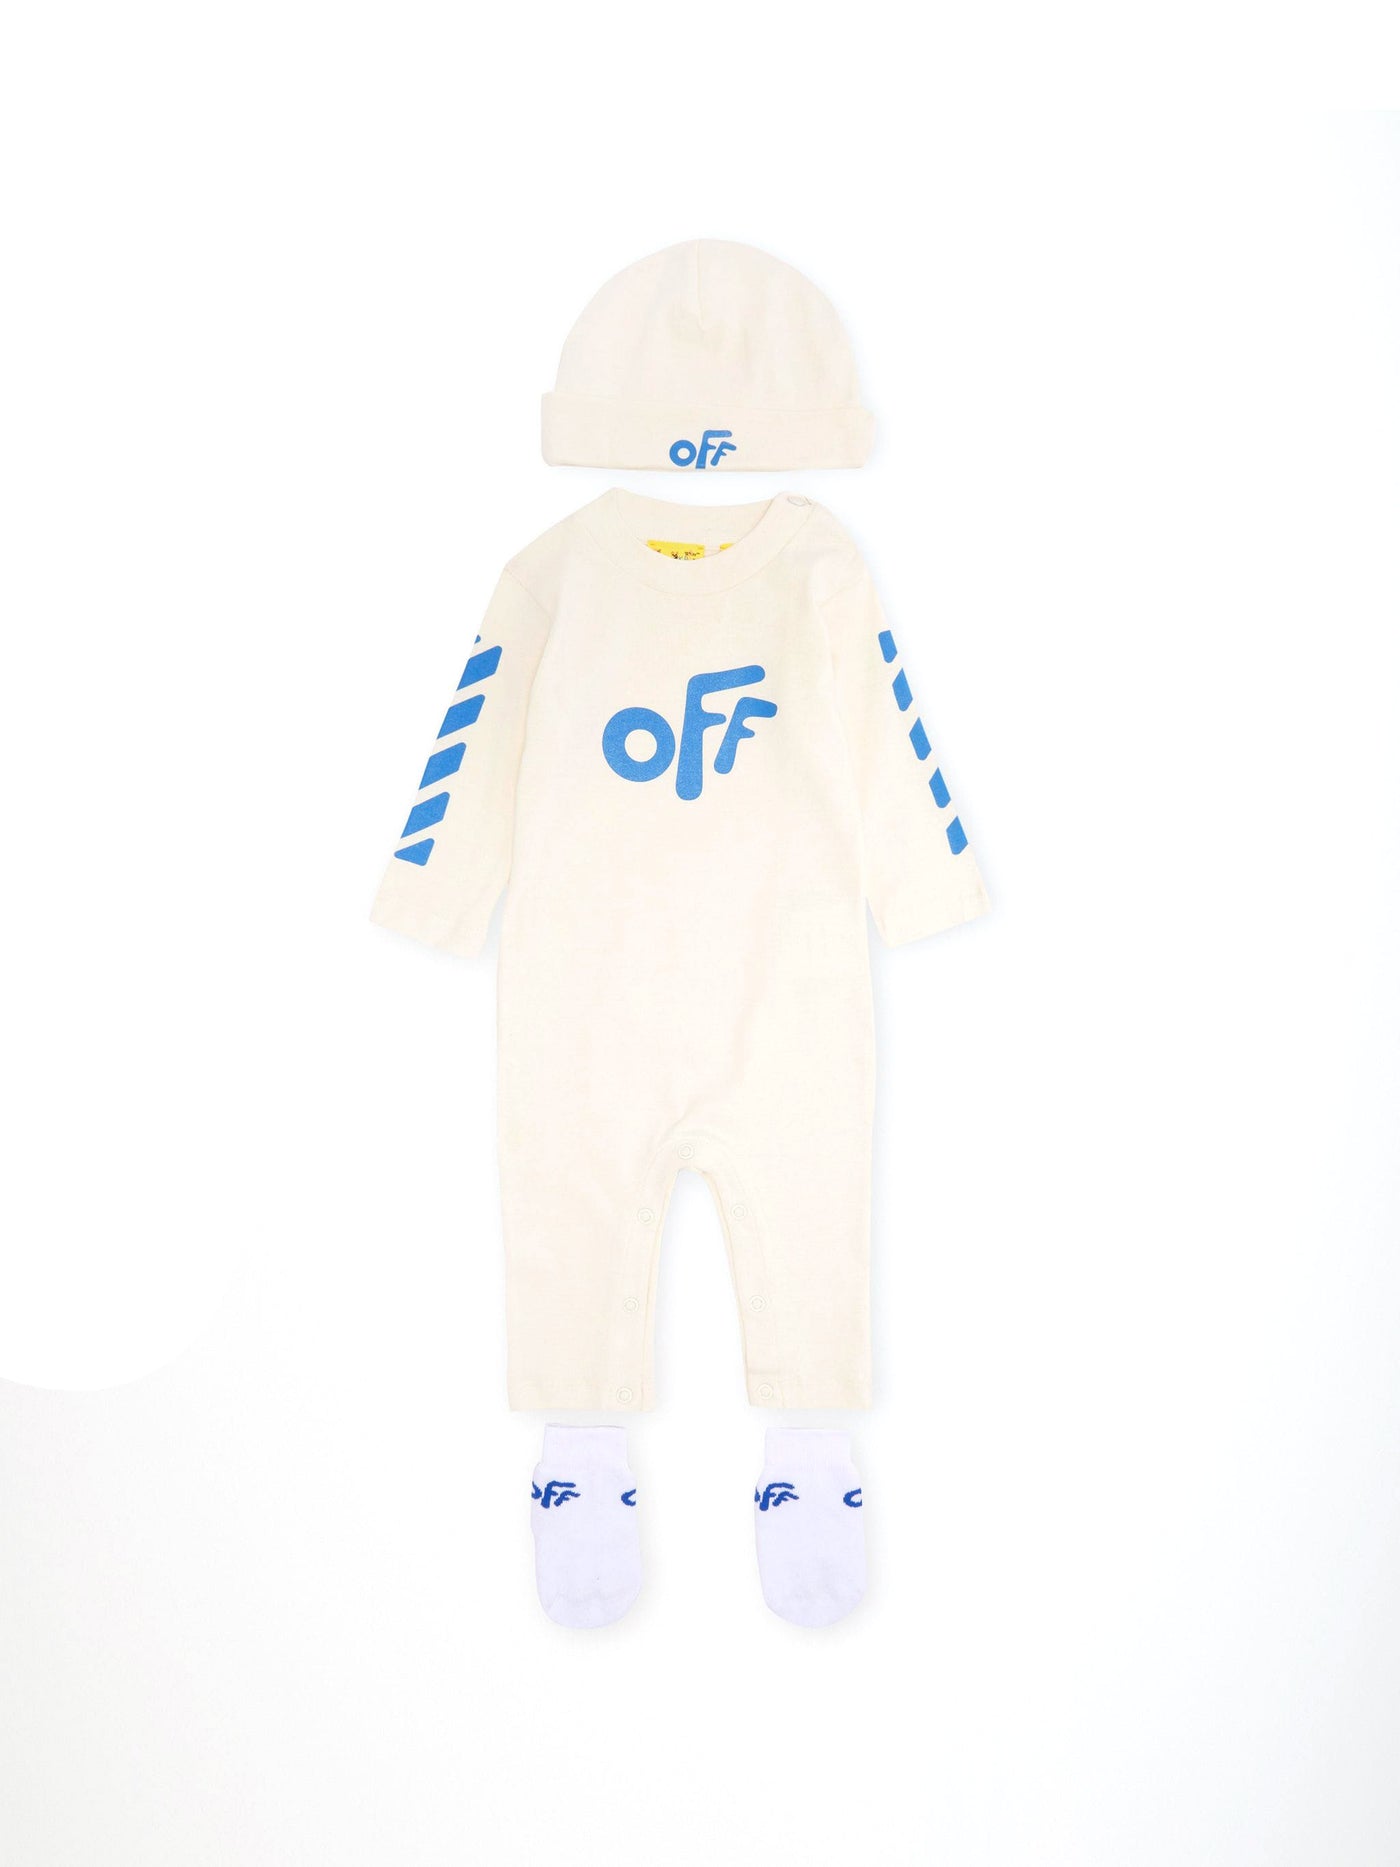 OFF ROUNDED 3-PACK KIT OFF WHITE BLUE